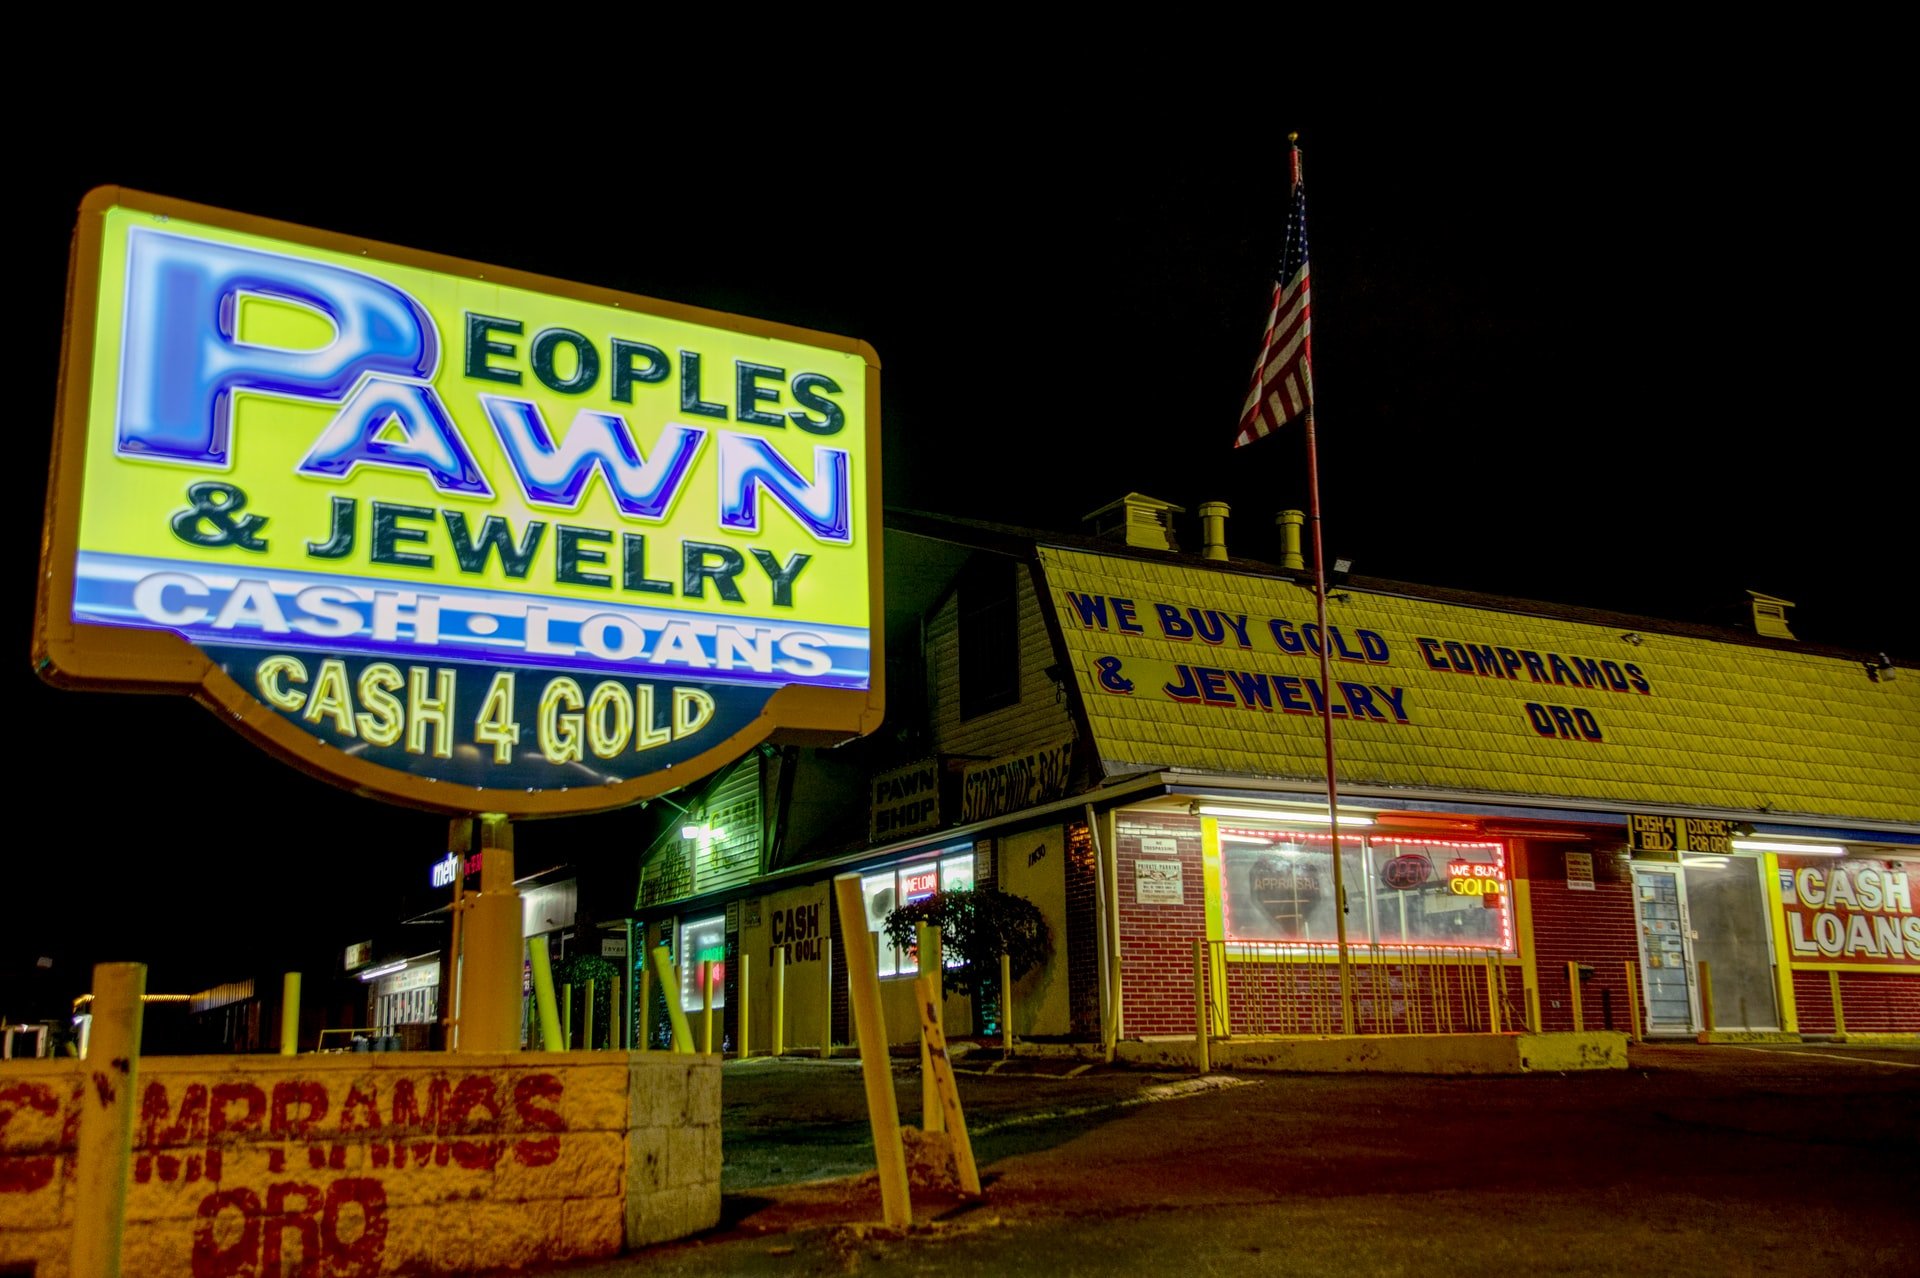 Many Redditors asked OP to check nearby pawn shops | Source: Unsplash